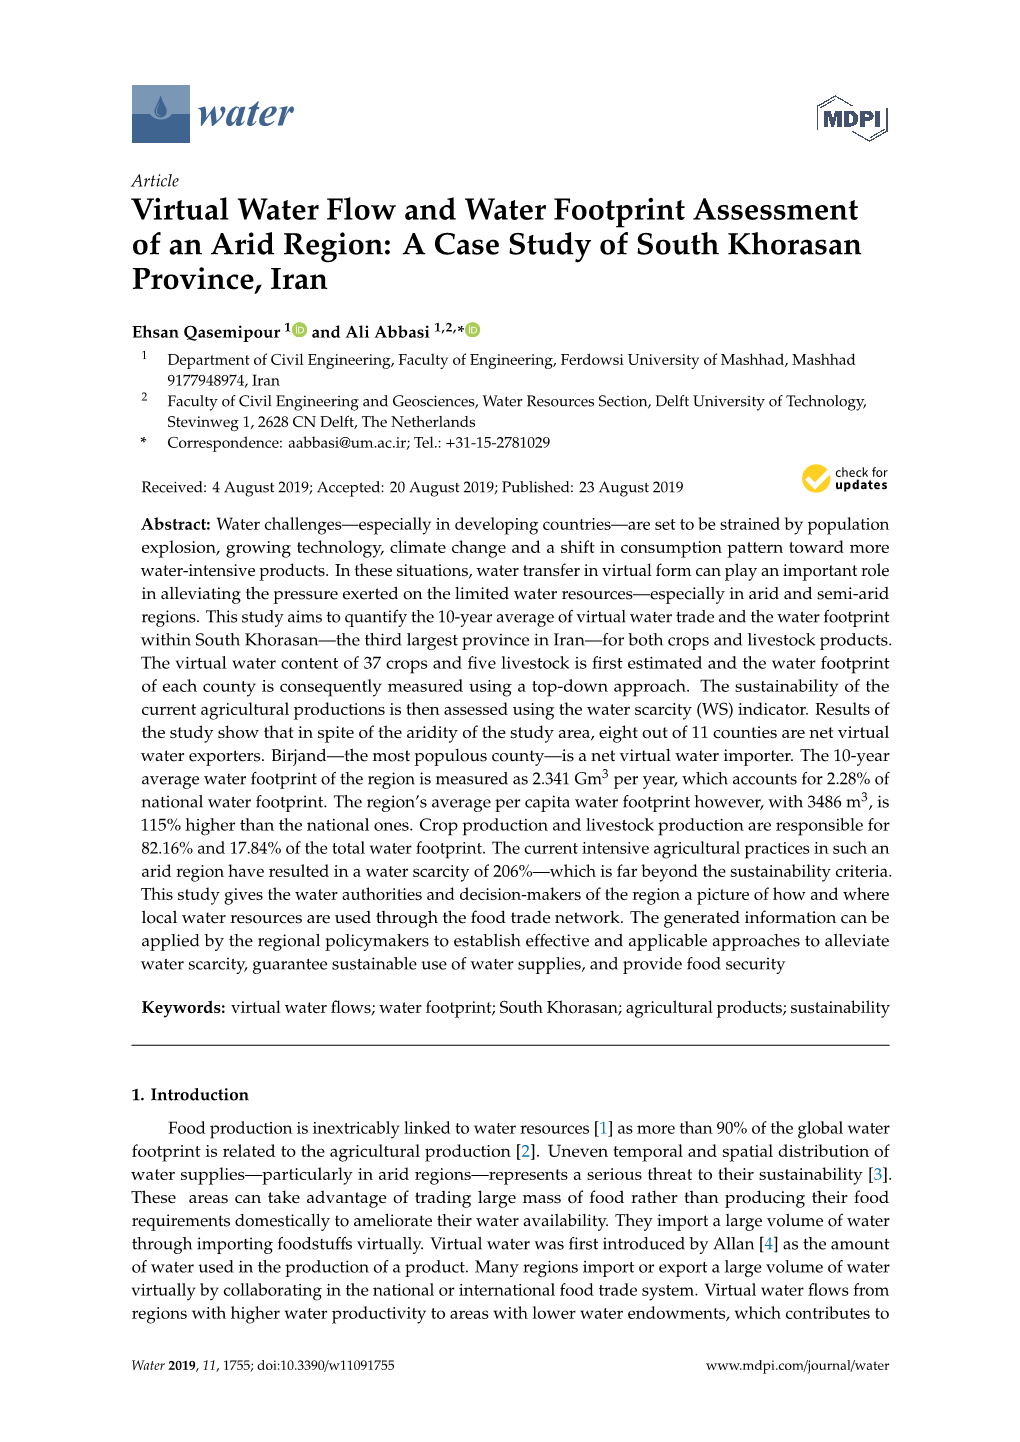 Virtual Water Flow and Water Footprint Assessment of an Arid Region: a Case Study of South Khorasan Province, Iran